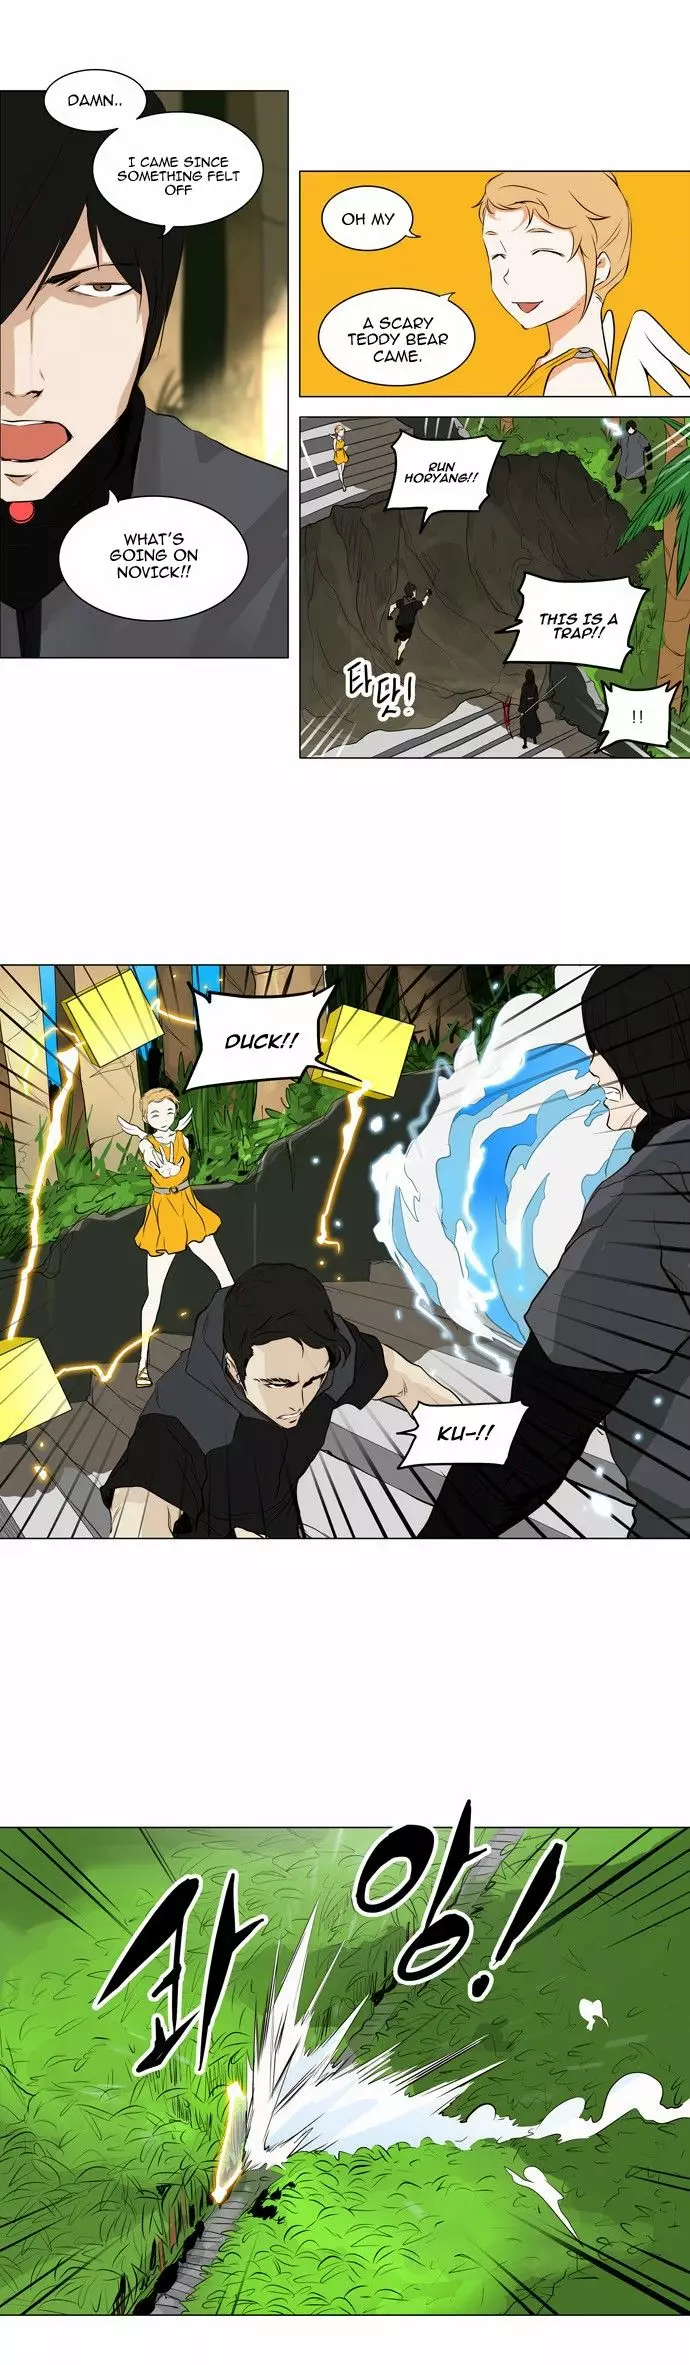 Tower of God - 164 page p_00018